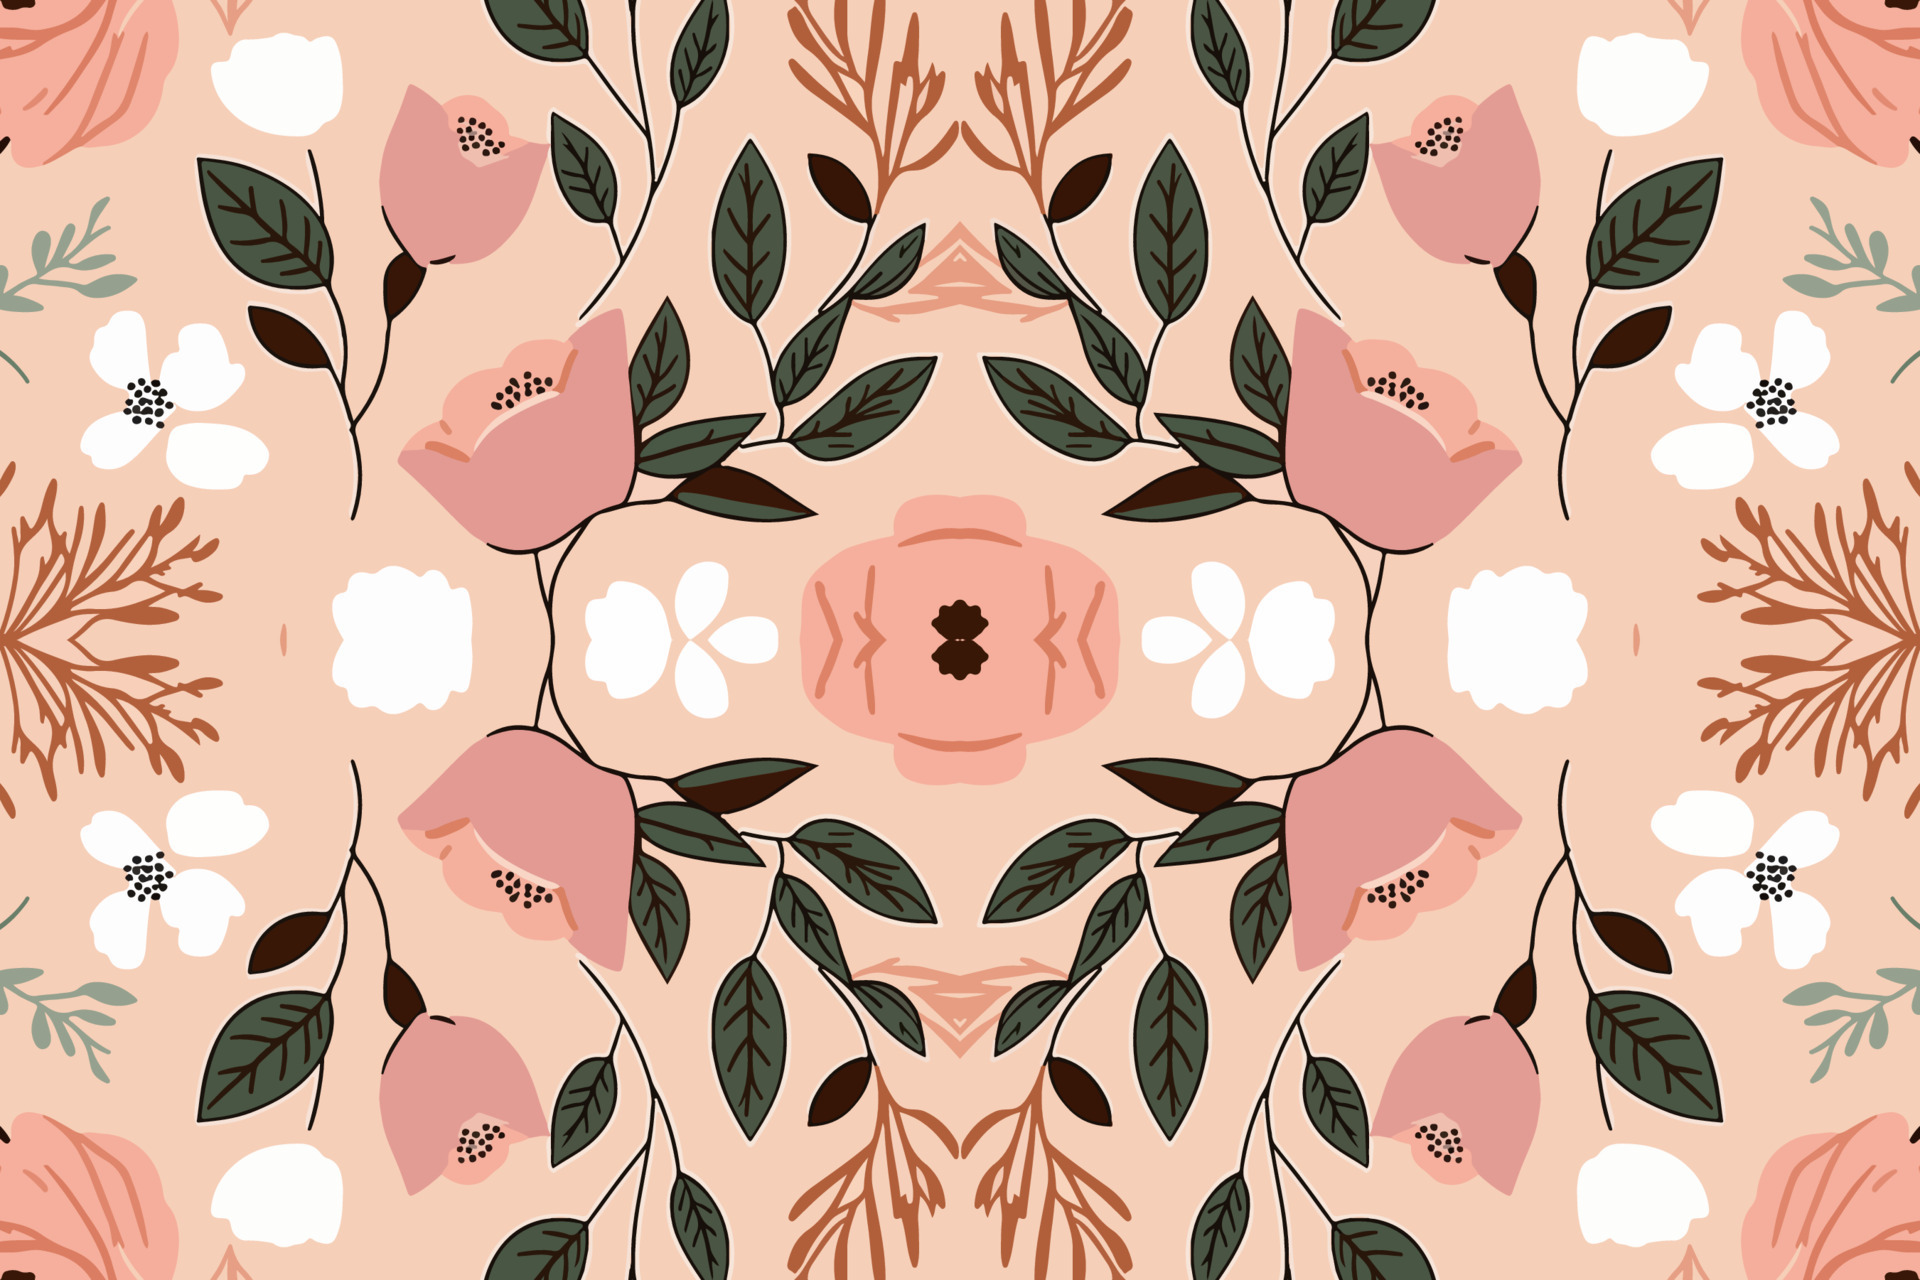 https://static.vecteezy.com/system/resources/previews/022/174/554/original/floral-seamless-pattern-light-pink-tone-background-abstract-graphic-line-modern-elegant-minimal-vintage-retro-style-design-for-fabric-texture-textile-print-art-background-wallpaper-tile-backdrop-vector.jpg